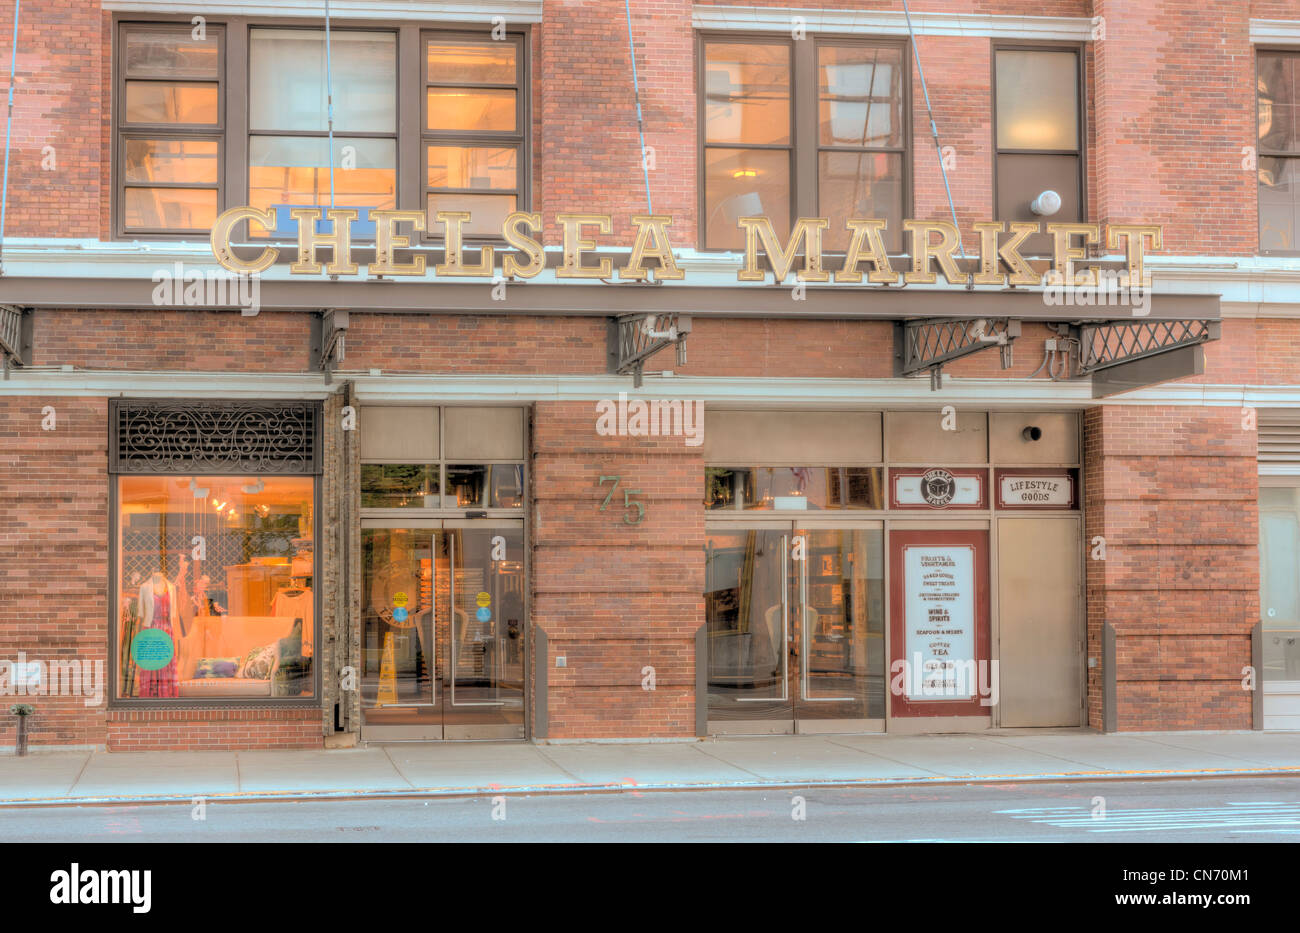 The exterior of Chelsea Market in New York City. Stock Photo